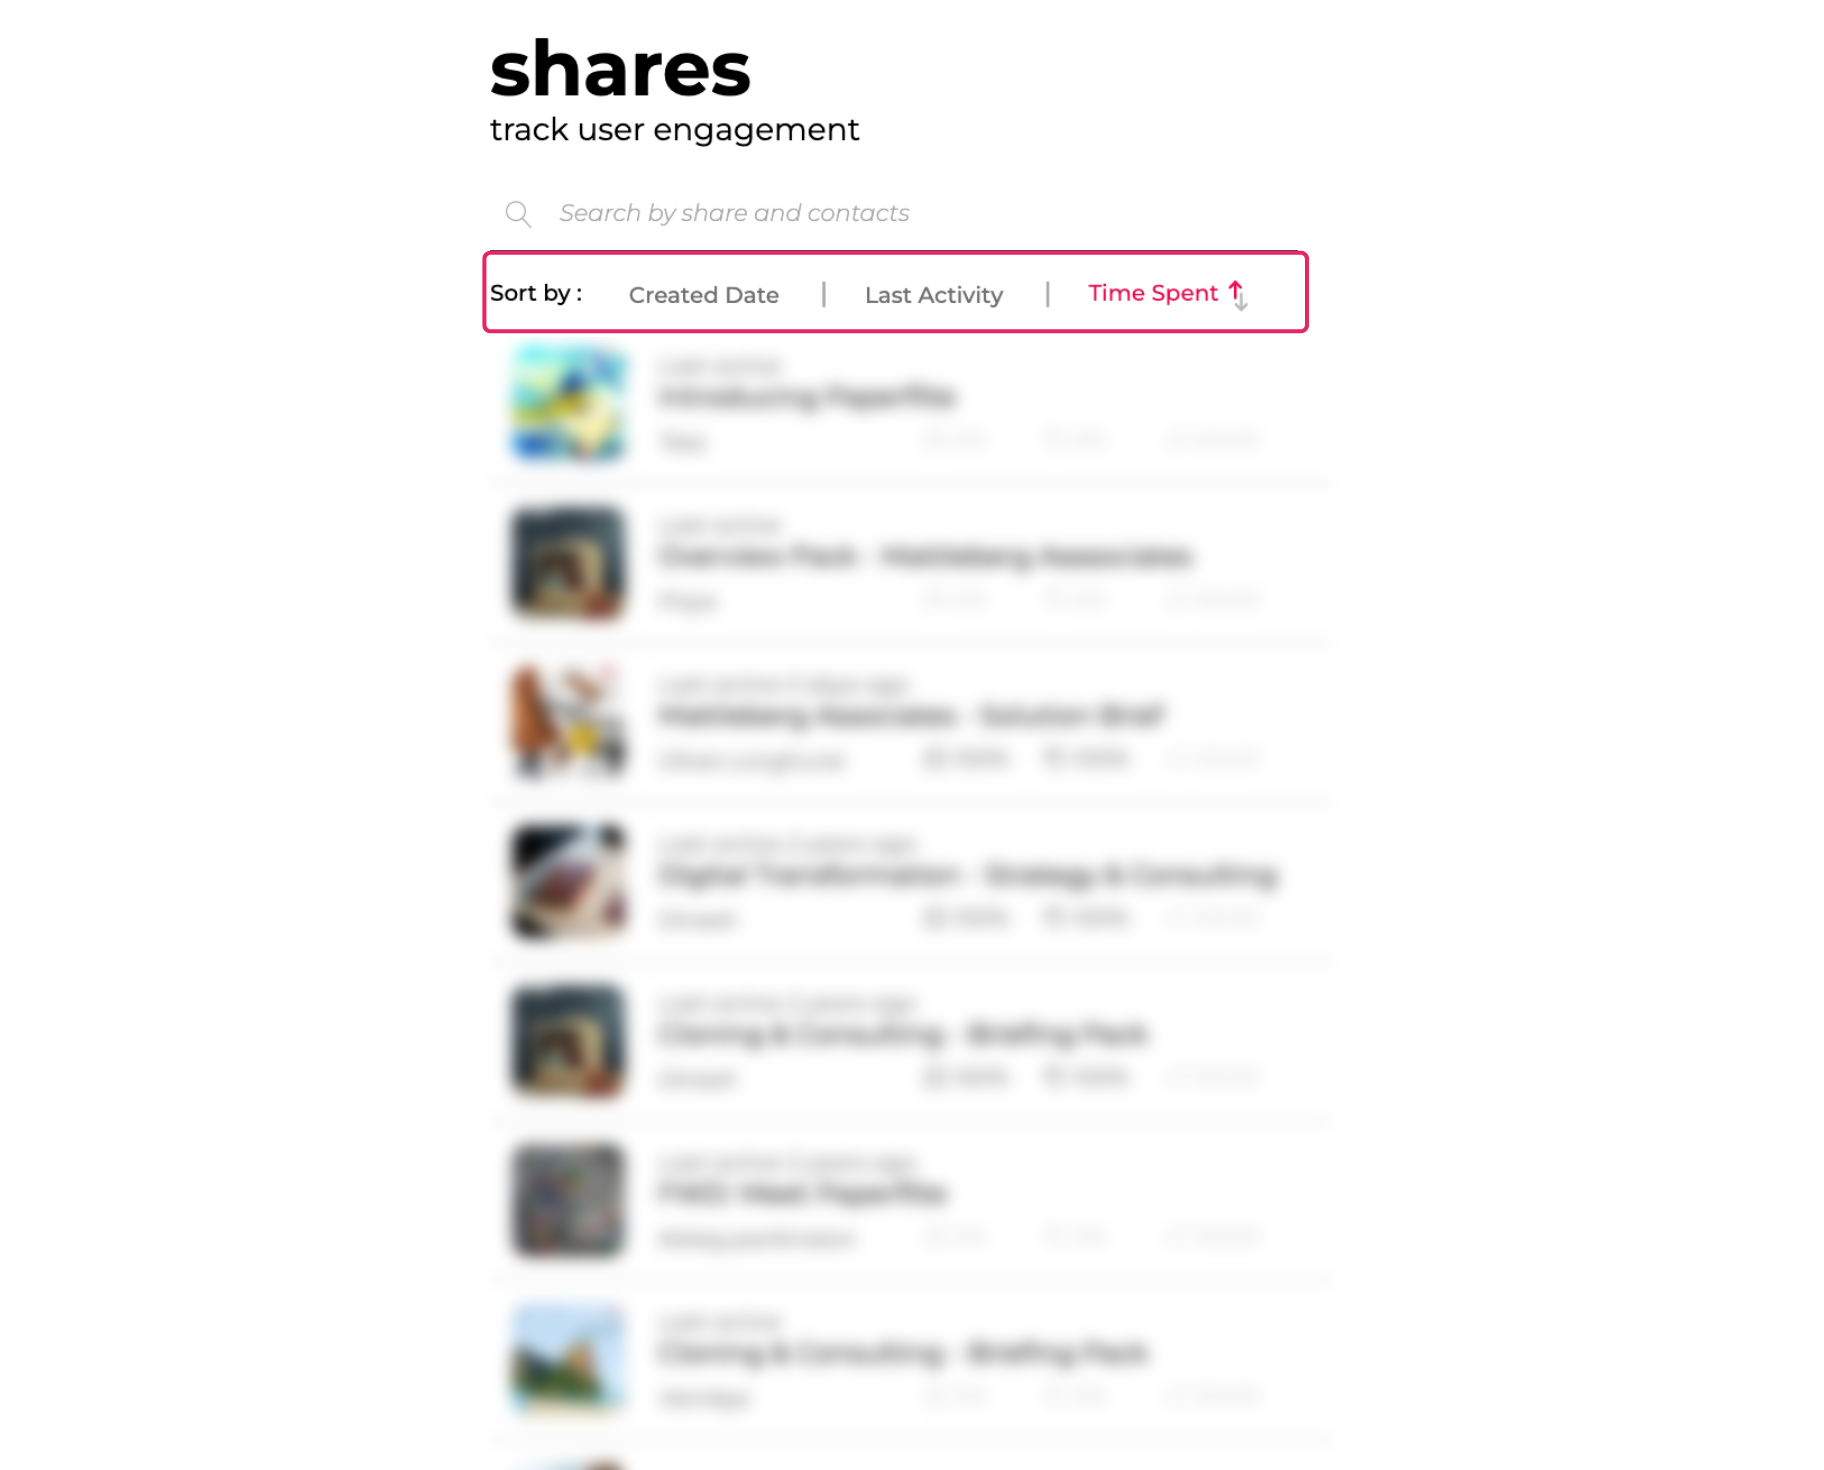 The new Time Spent filter on the Share module in the Paperflite platform